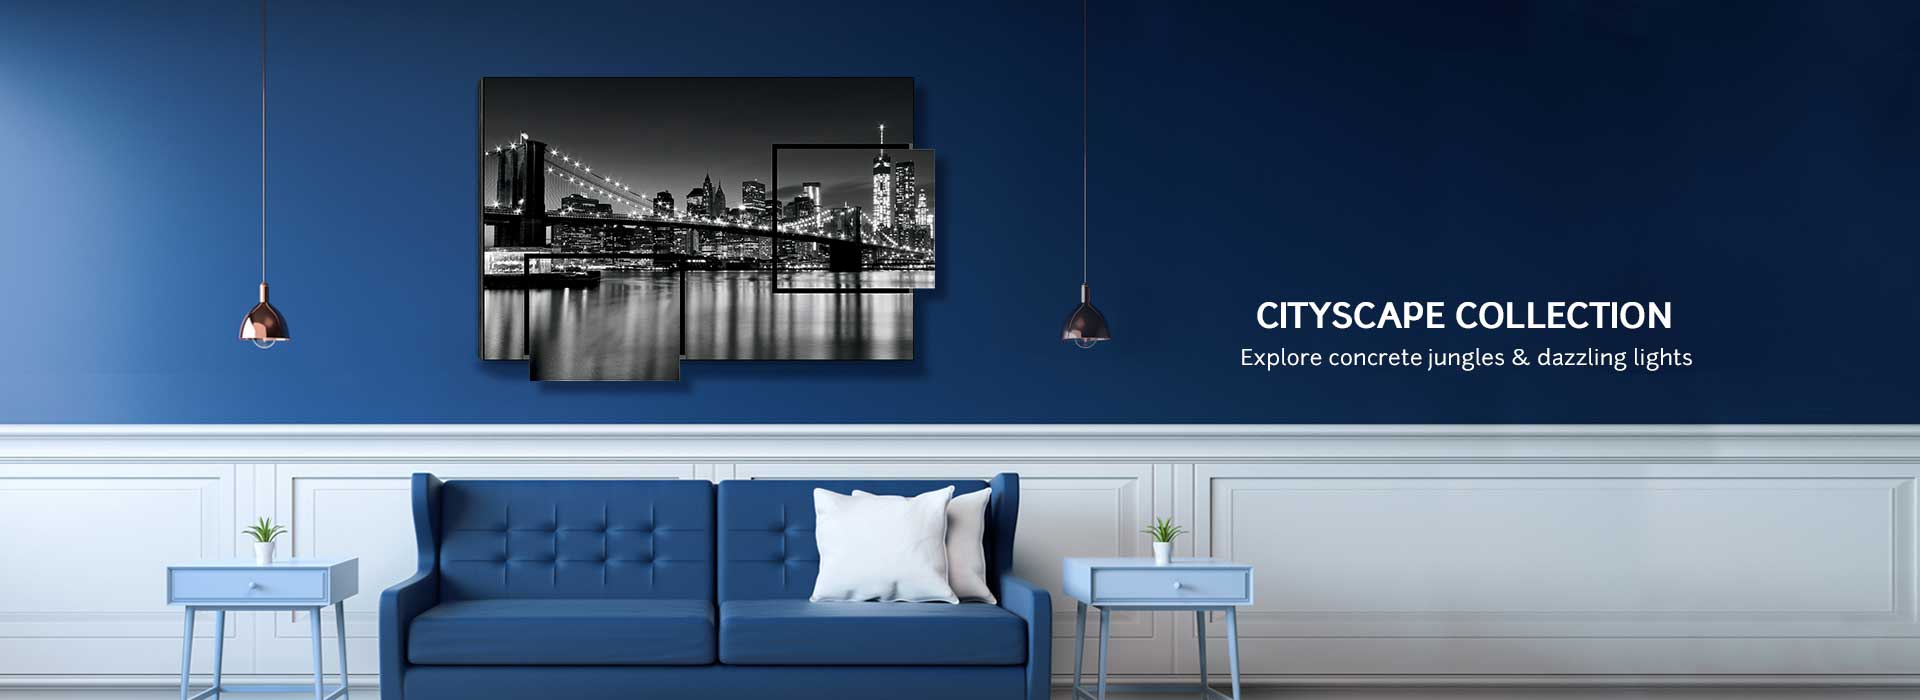 Cityscape Collection